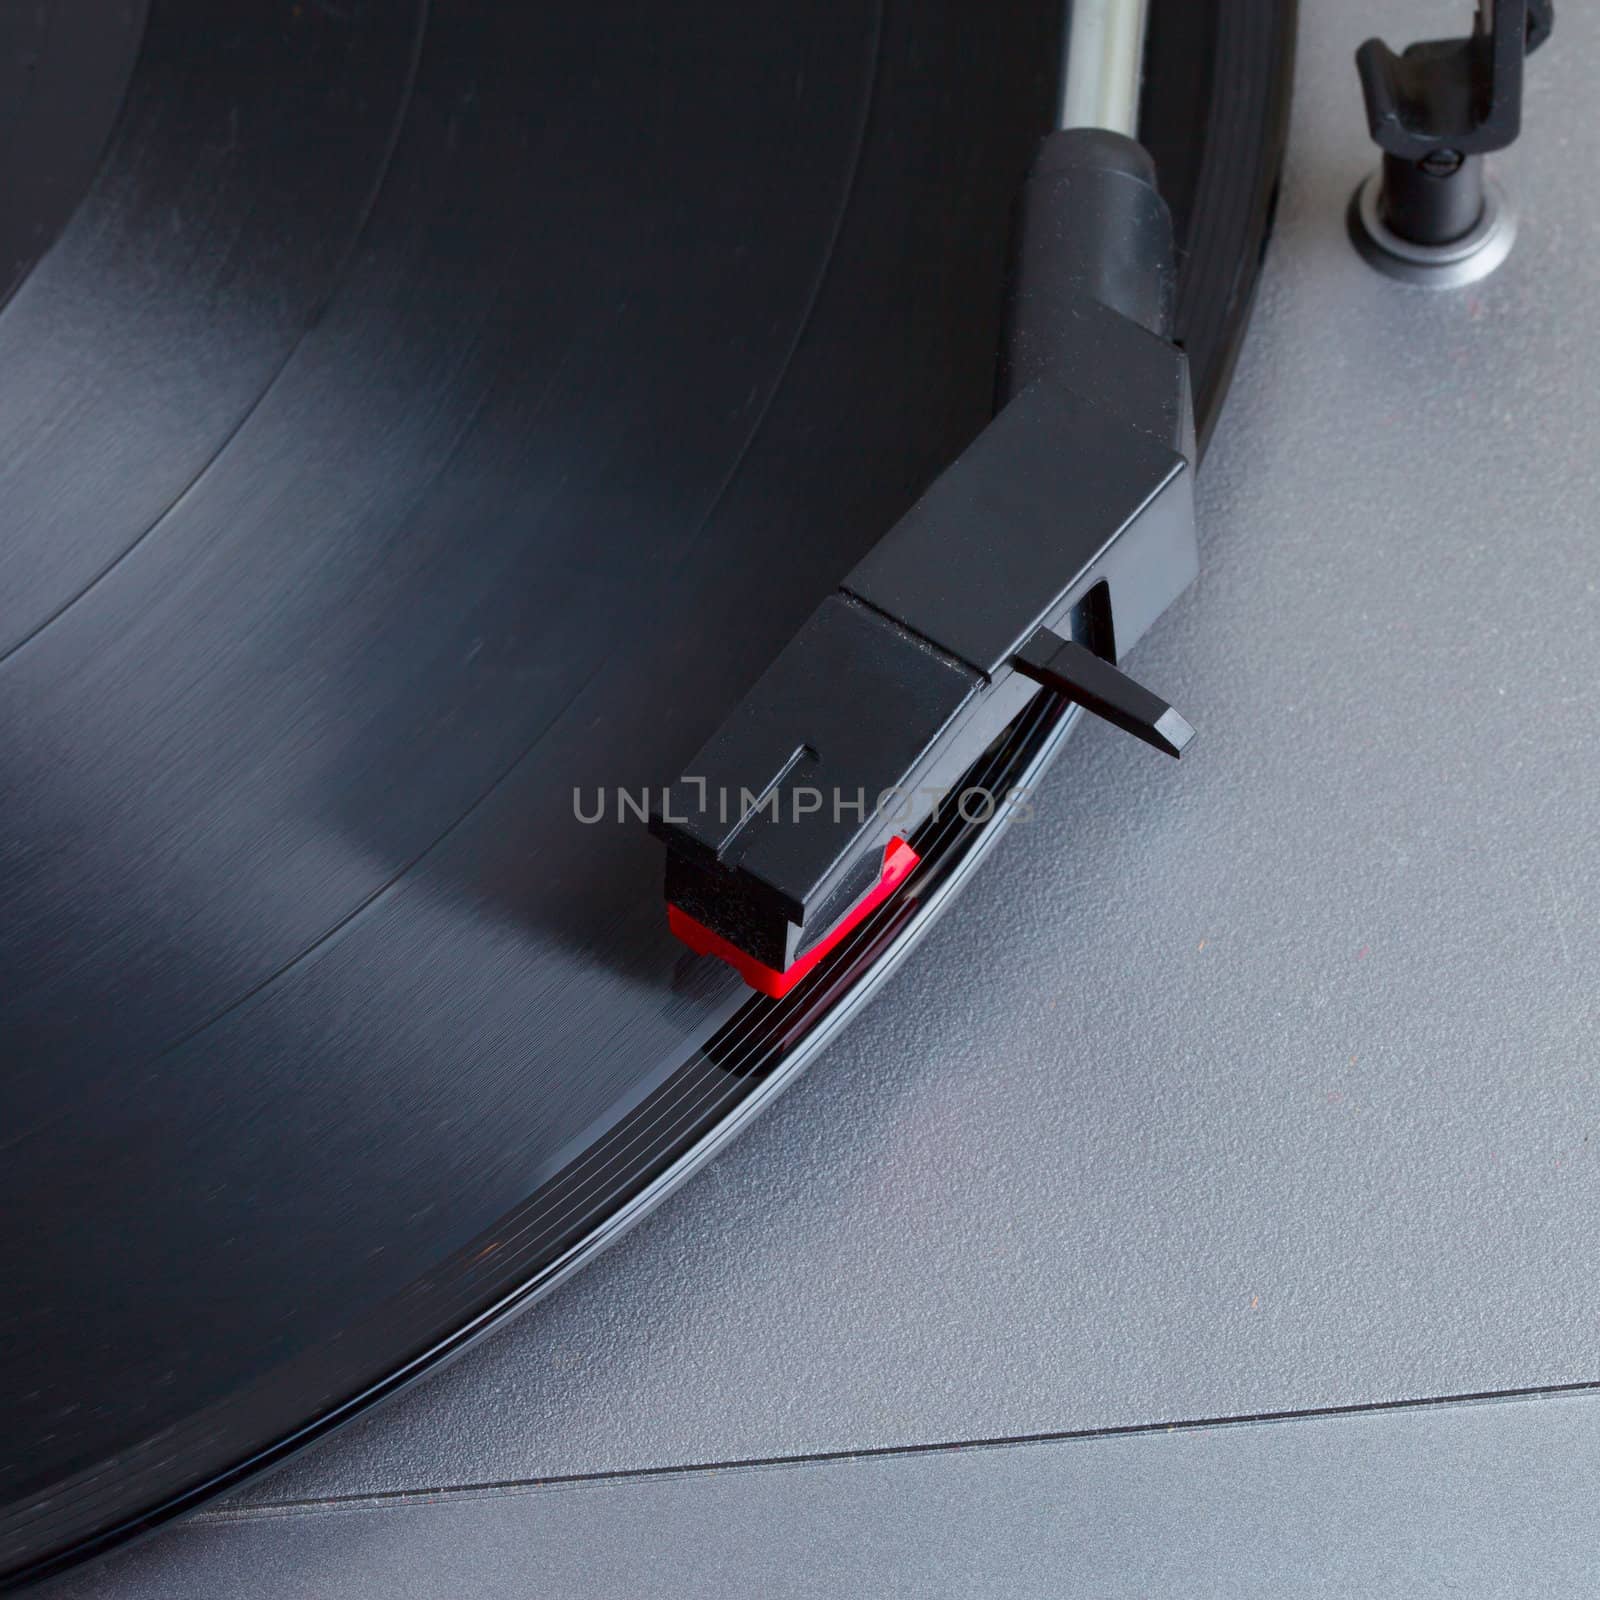 Turntable with a vinyl record, square image